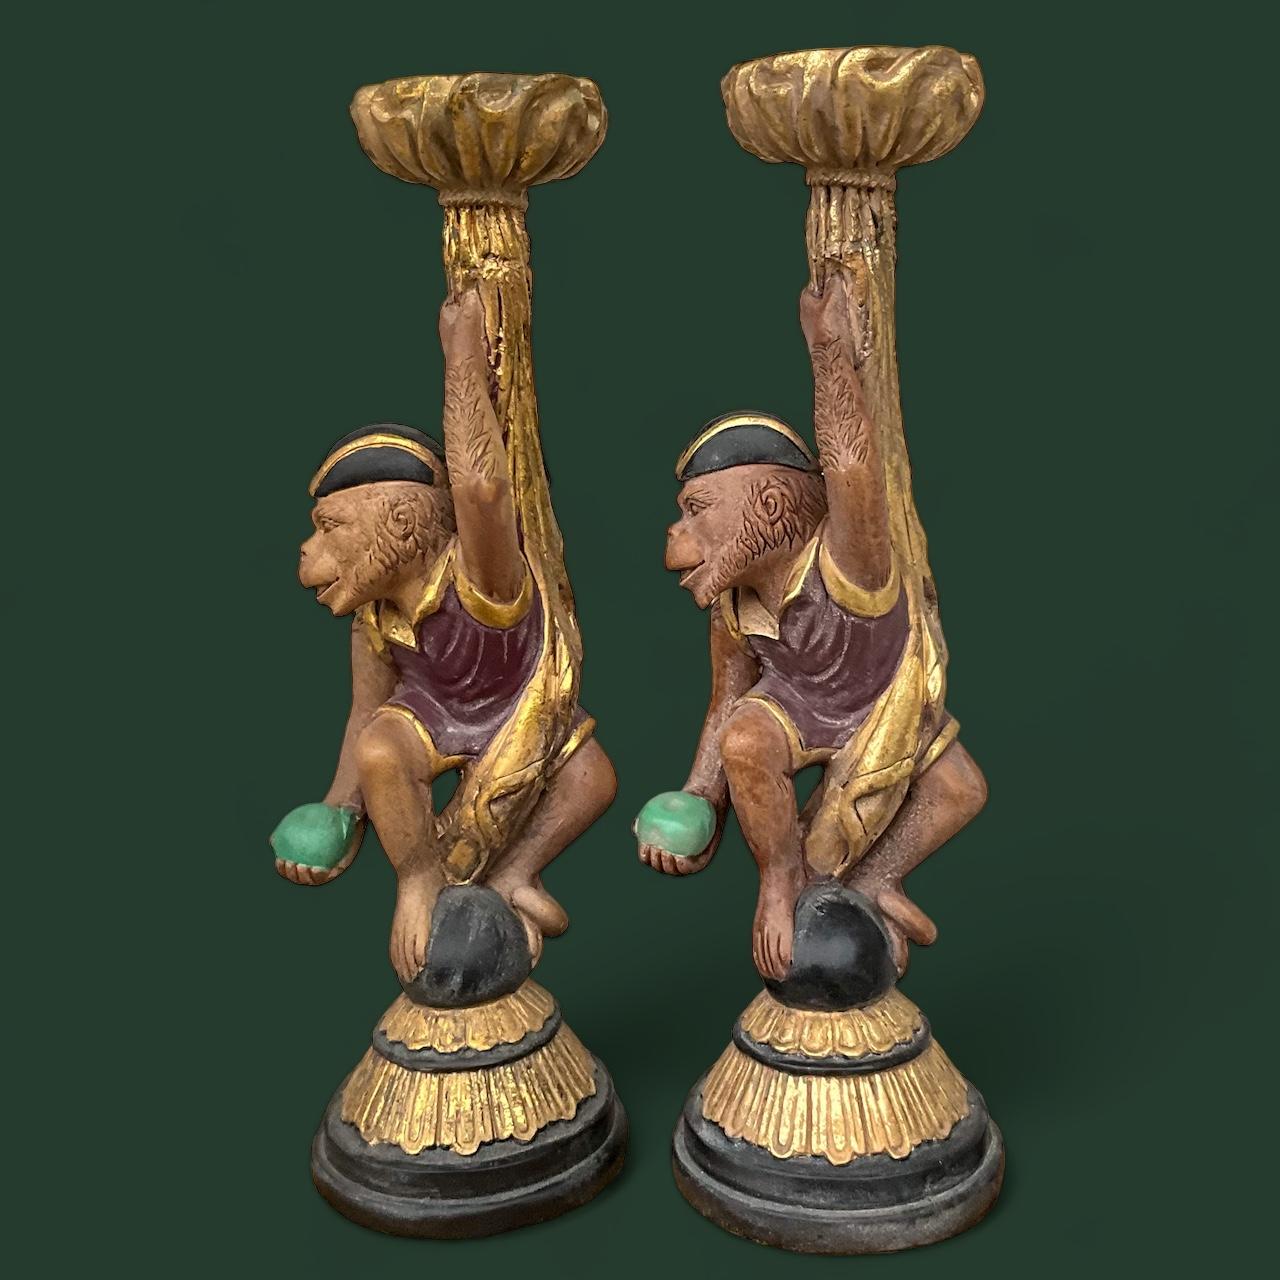 This is a fun pair of regency style gilt monkey form holiday candlesticks attributed to Maitland - Smith. They are in very good condition.